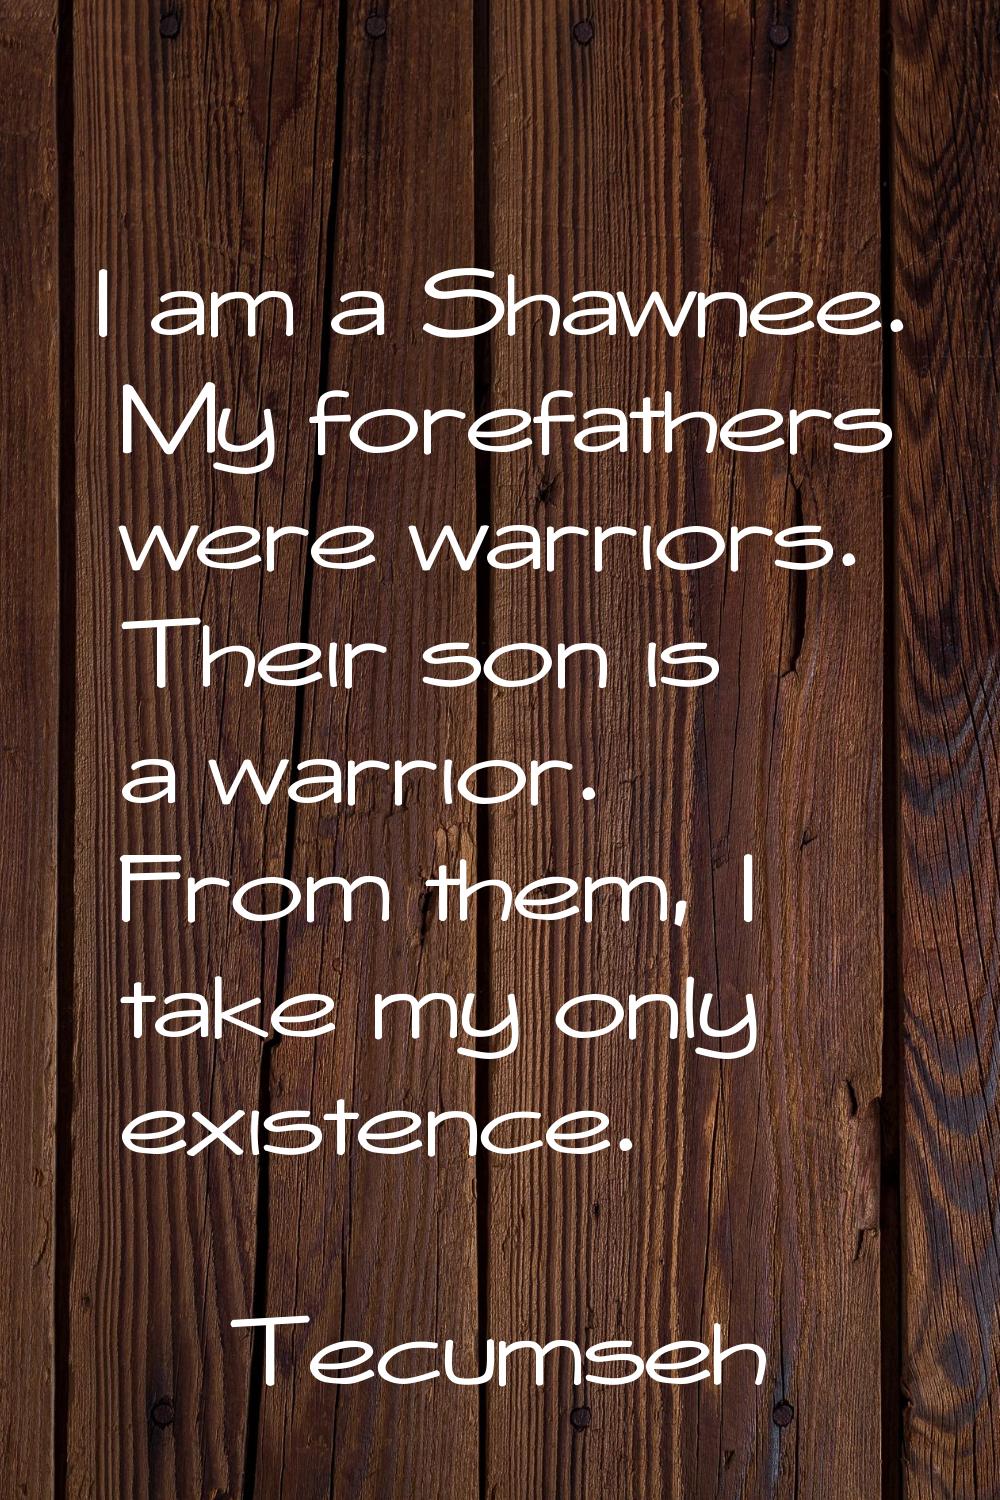 I am a Shawnee. My forefathers were warriors. Their son is a warrior. From them, I take my only exi